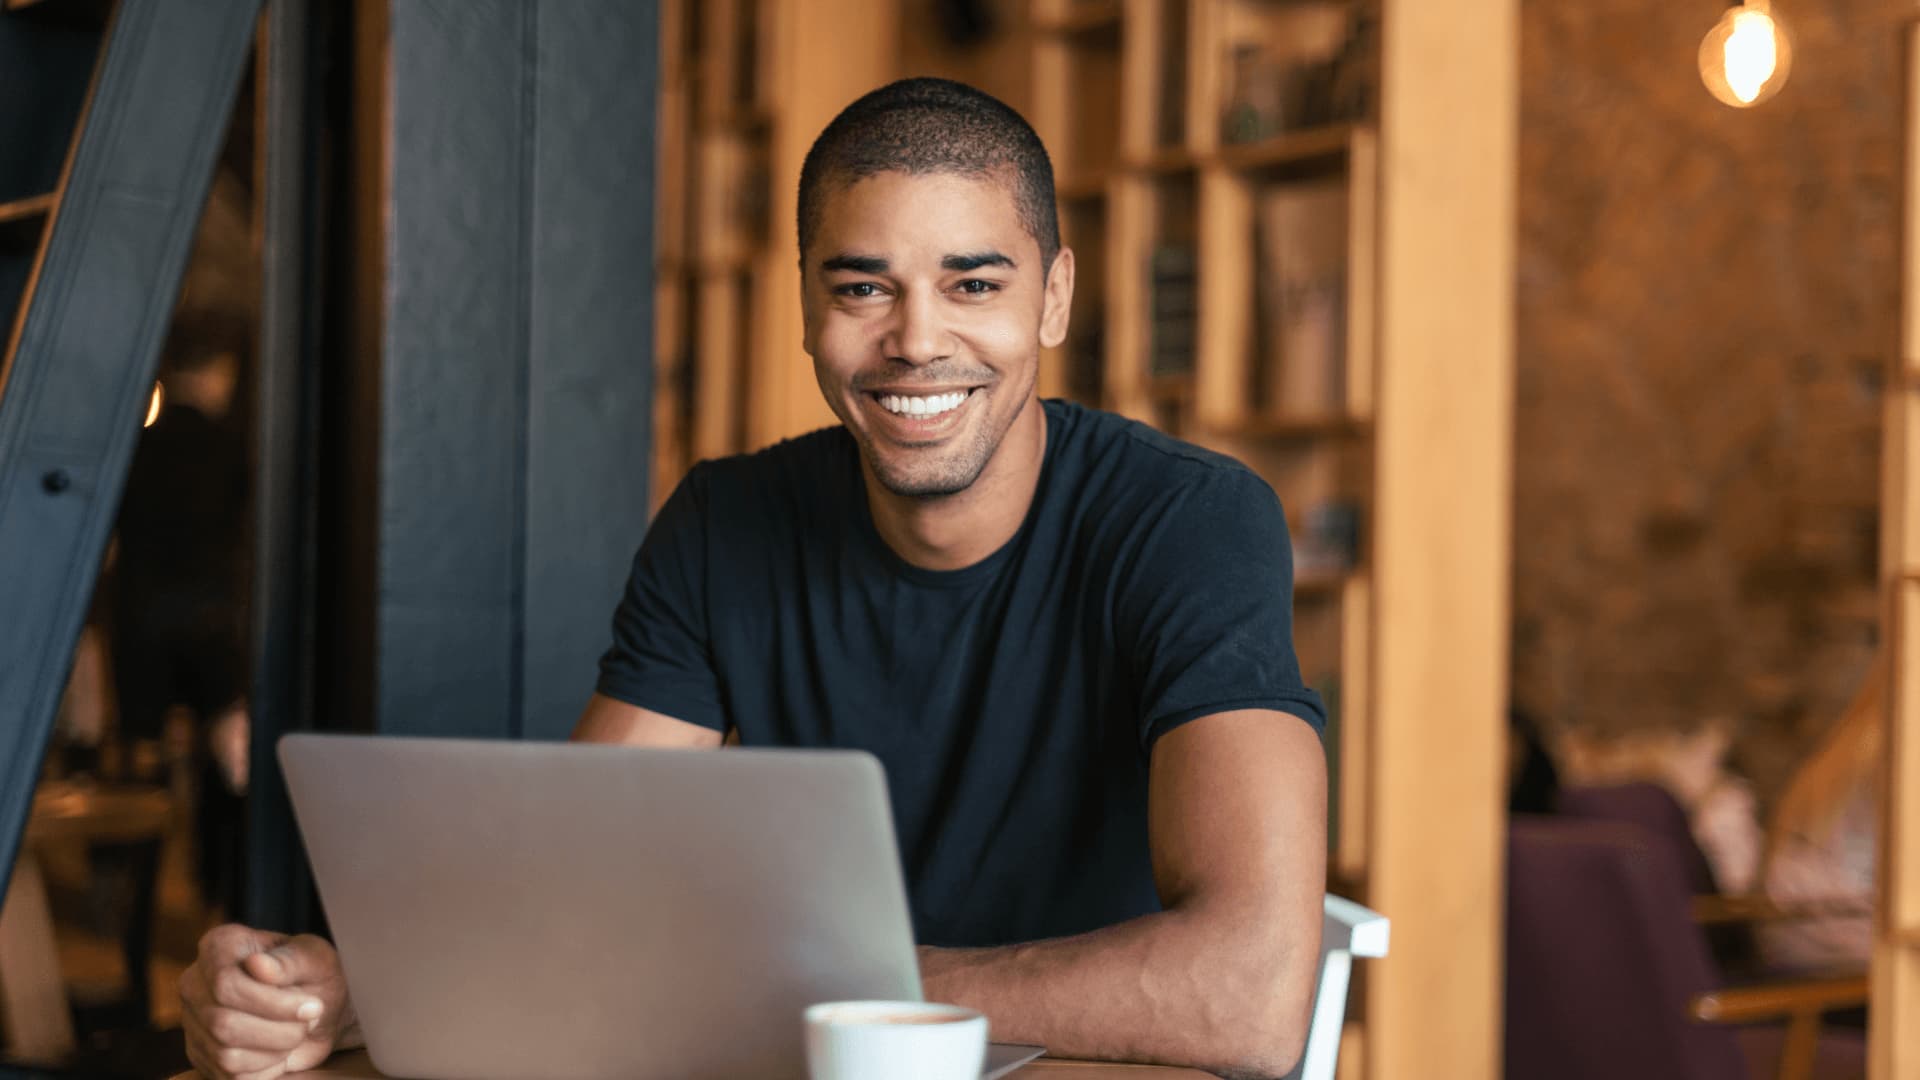 Smiling man finding an affordable online course to reduce how much university costs UK.